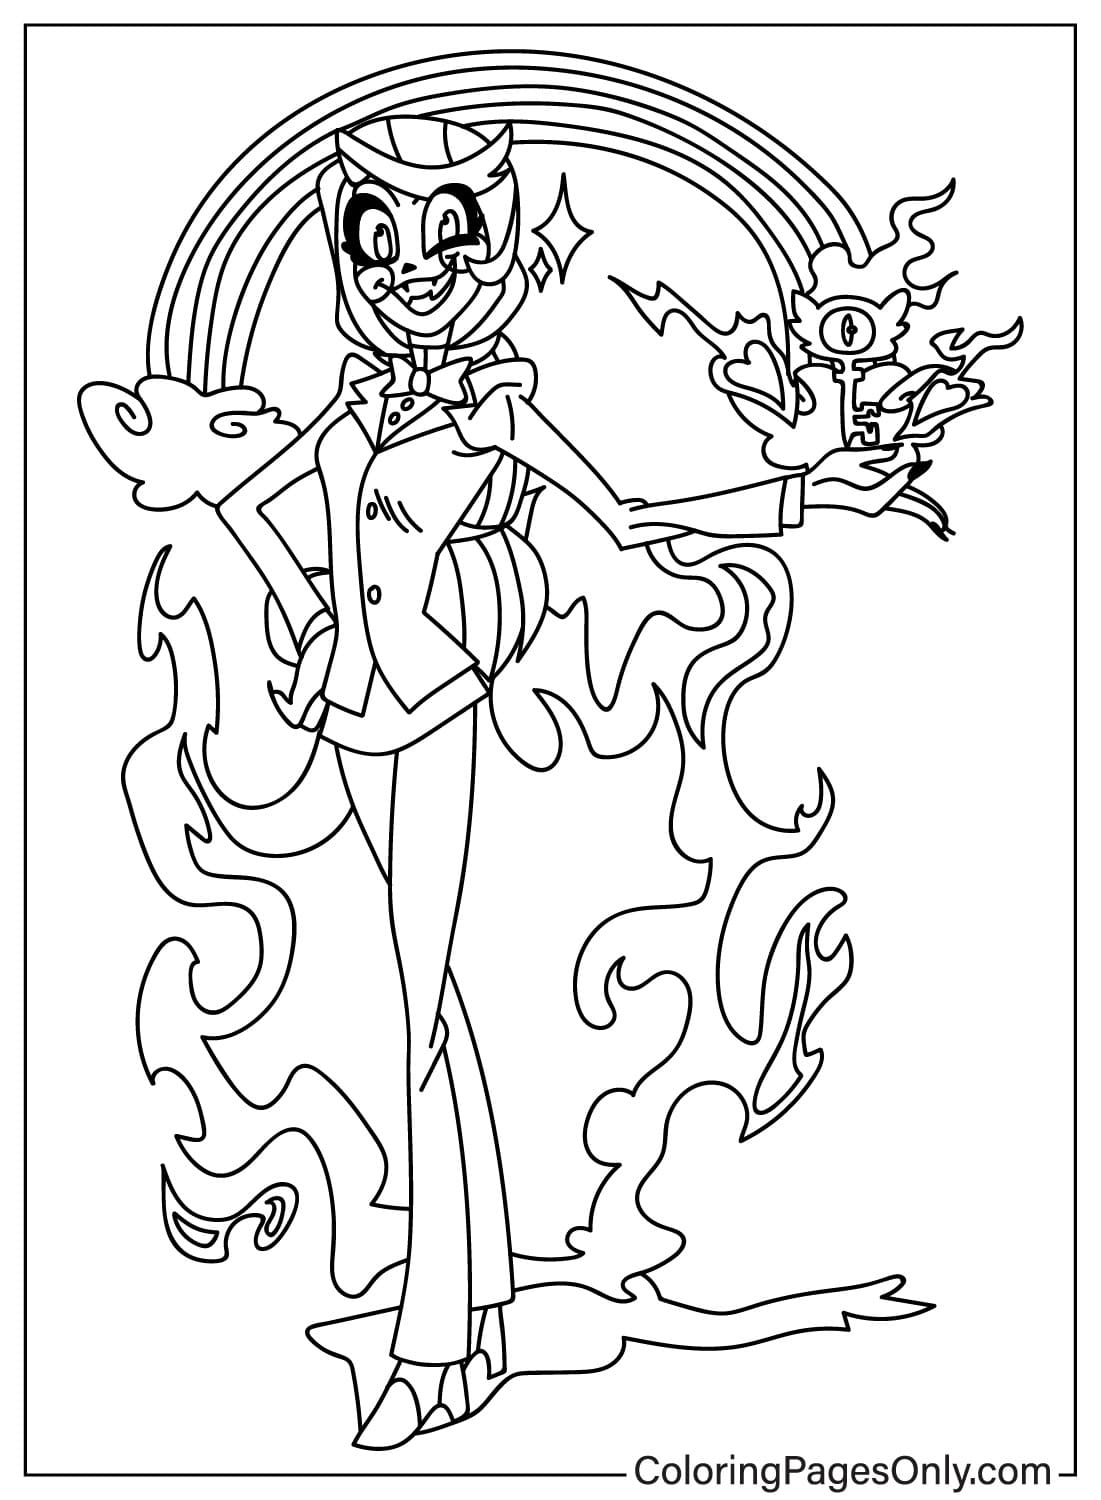 Charlie Morningstar Coloring Page from Hazbin Hotel